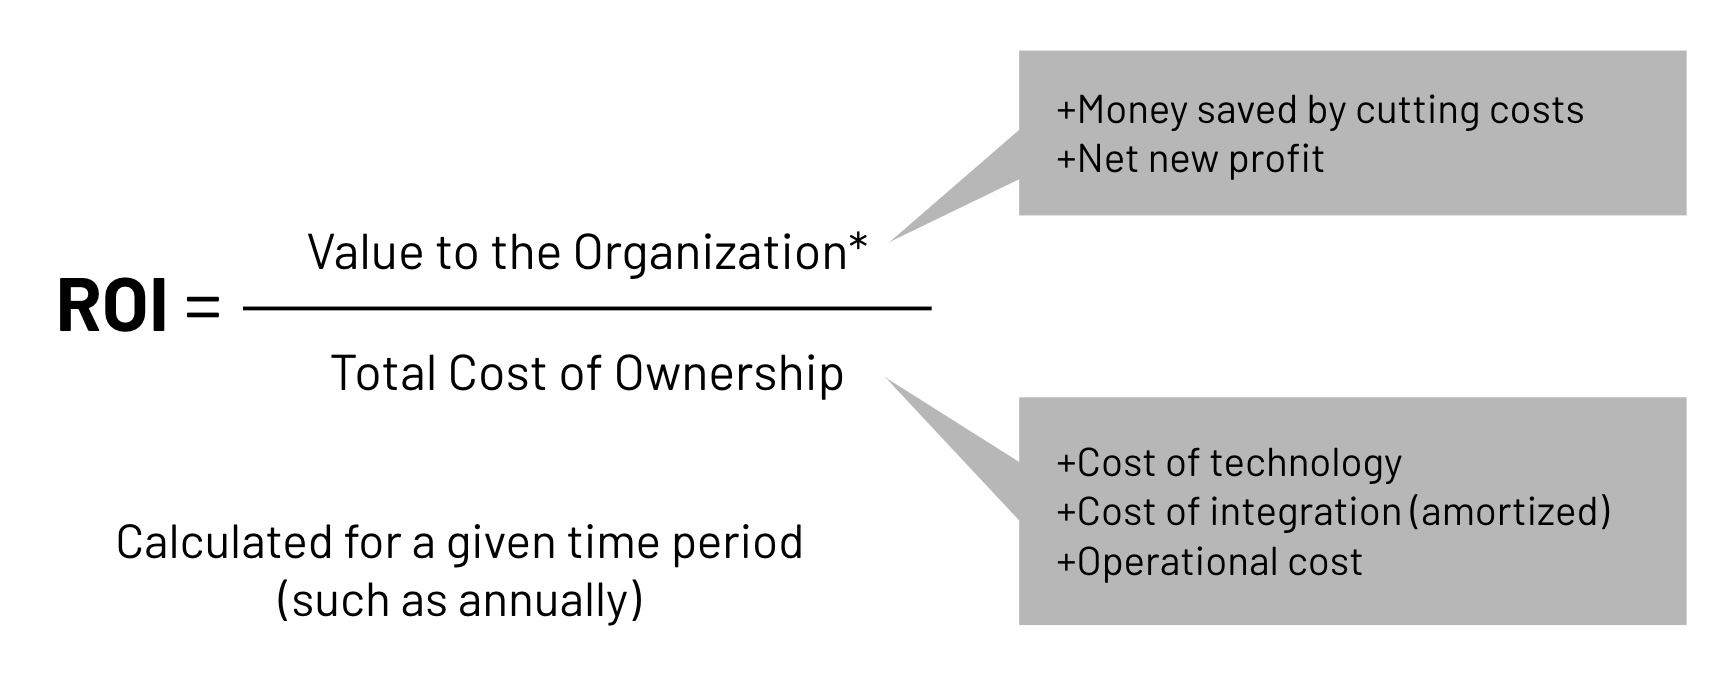 ROI is the value to the organization divided by the total cost of ownership